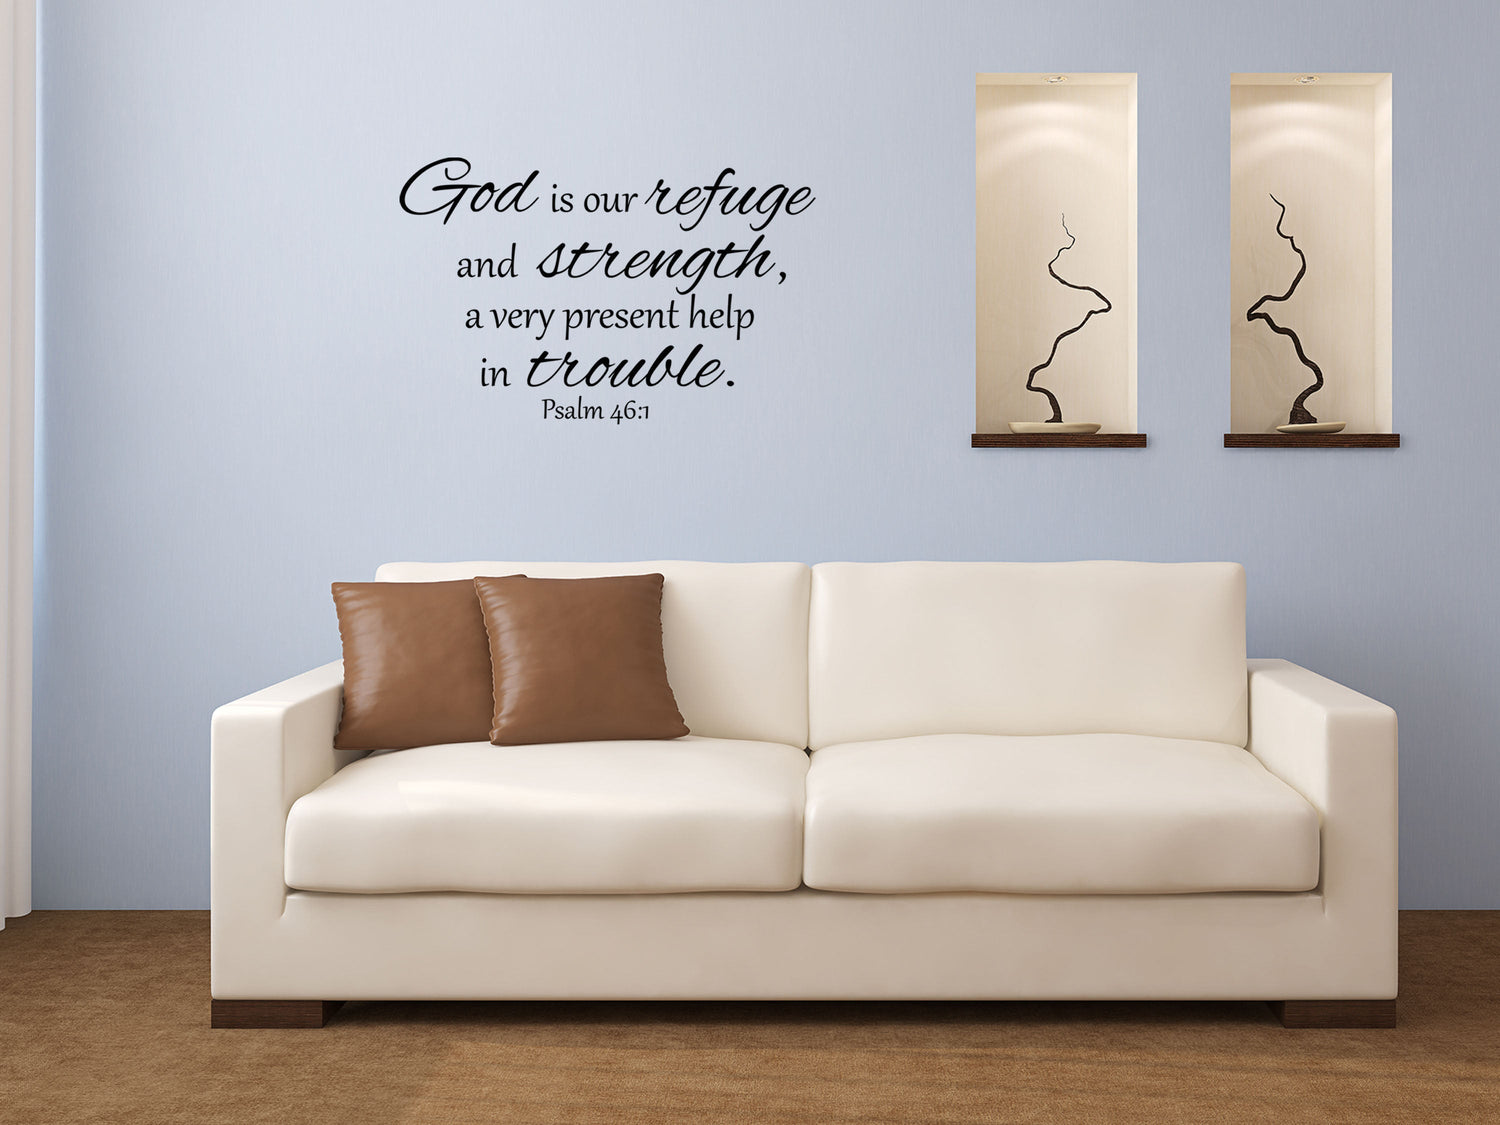 Psalm 46:1 God Is Our Refuge KJV Vinyl Wall Decal - Refuge Wall Decal Very Present Help - Bible Verse Wall Decal Vinyl Wall Decal Inspirational Wall Signs 